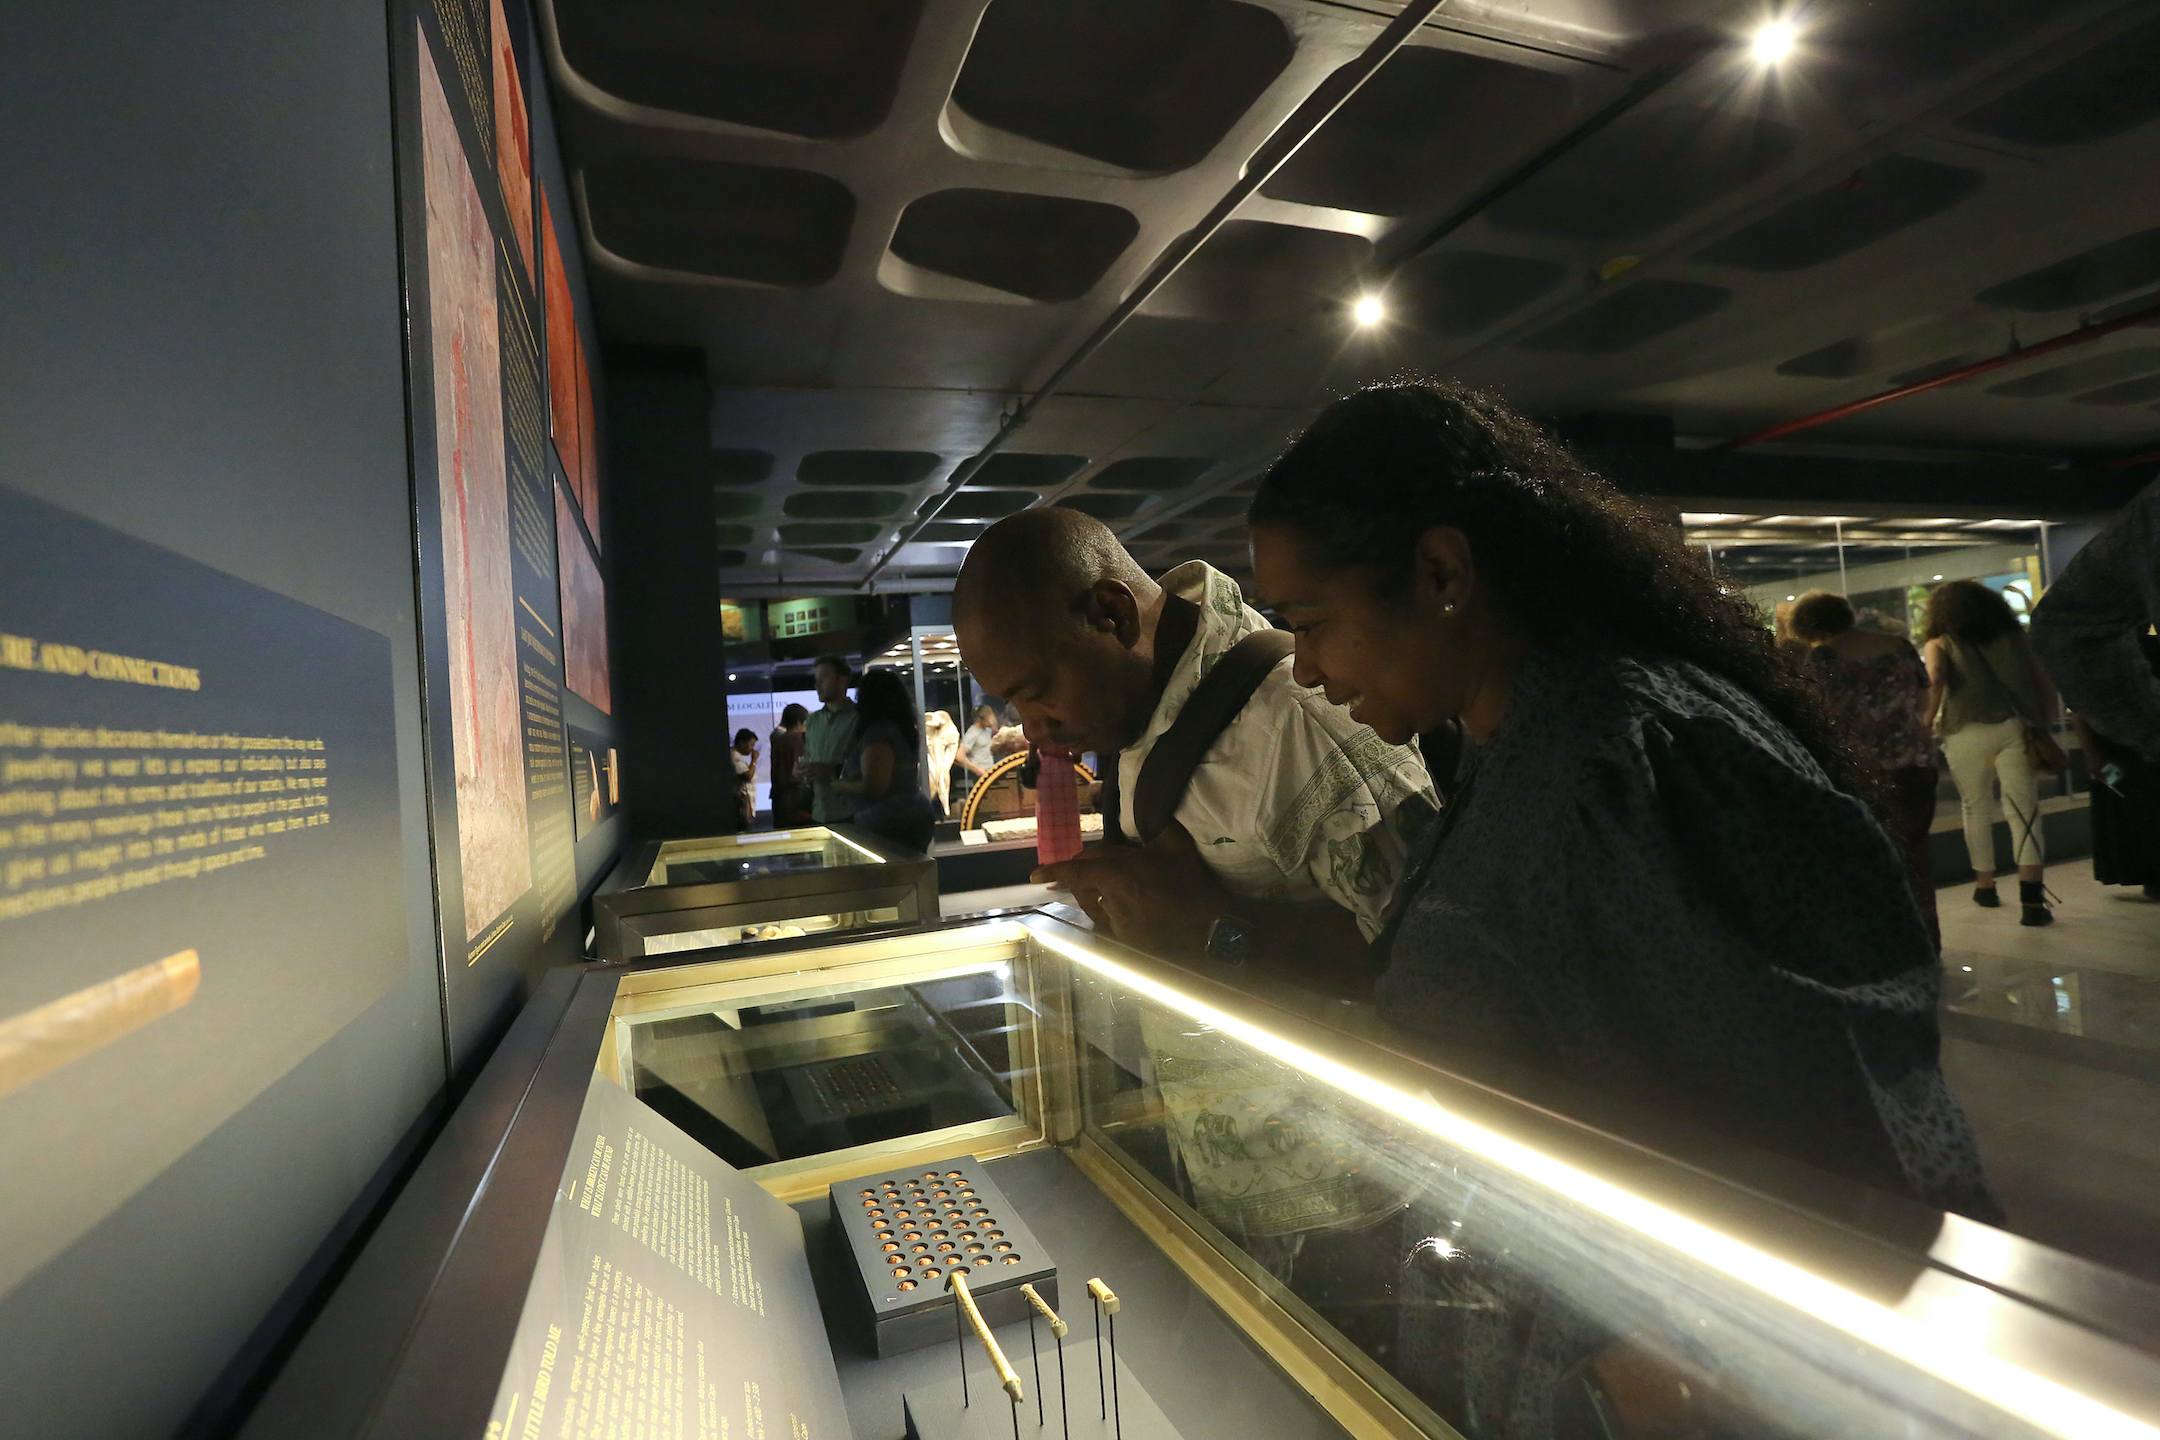 Guests examine an exhibit at the opening of the 'Hidden Wonders of the Iziko South African Museum' exhibition. Image: Nigel Pamplin/Iziko Museums of South Africa